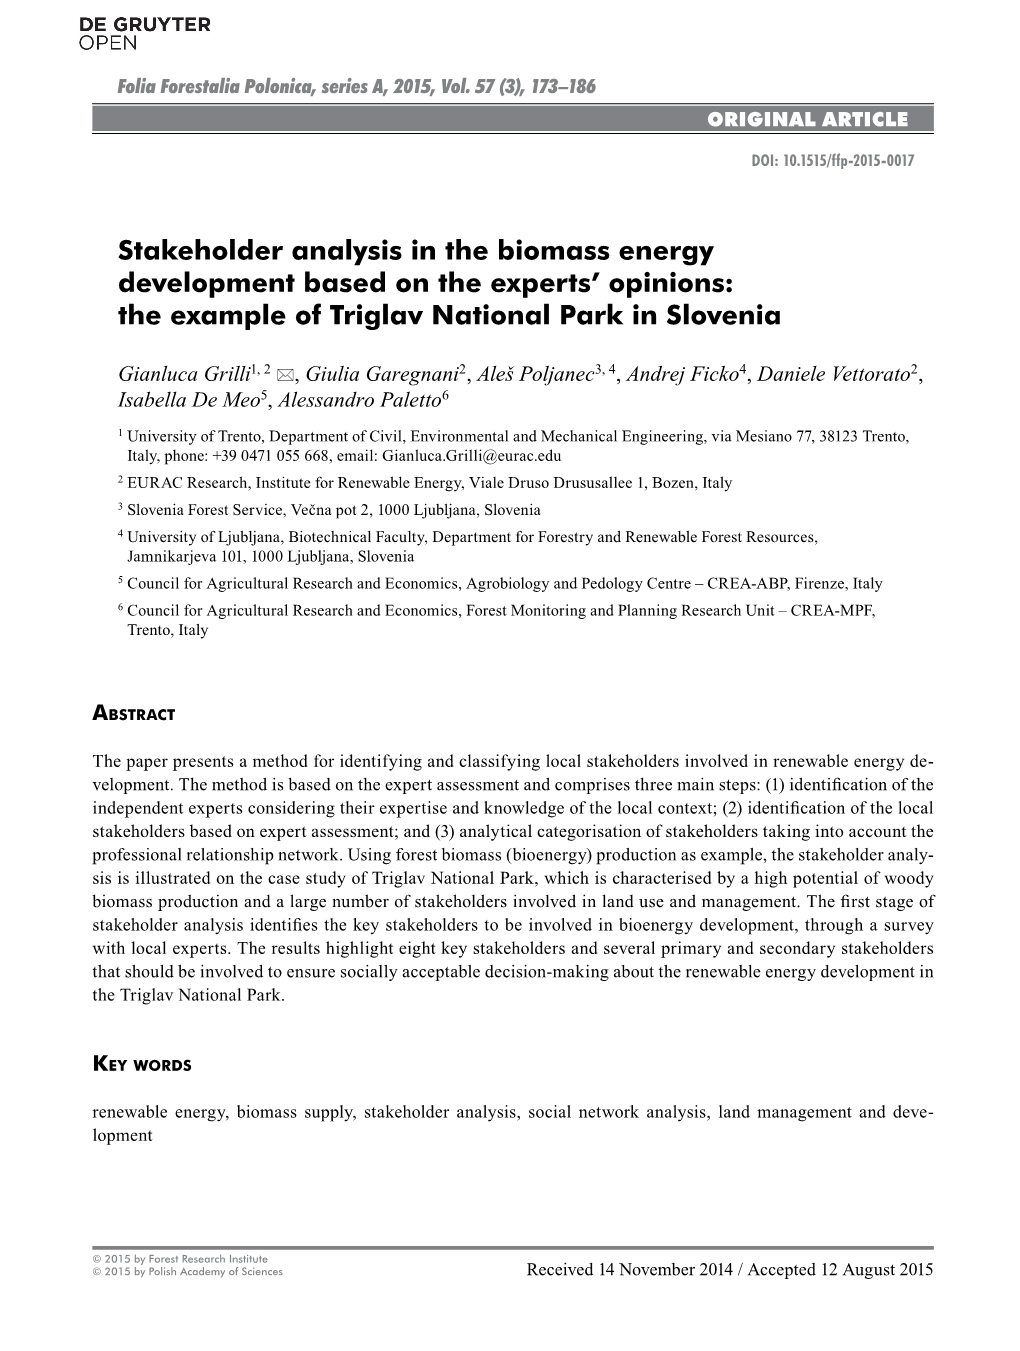 Stakeholder Analysis in the Biomass Energy Development Based on the Experts’ Opinions: the Example of Triglav National Park in Slovenia